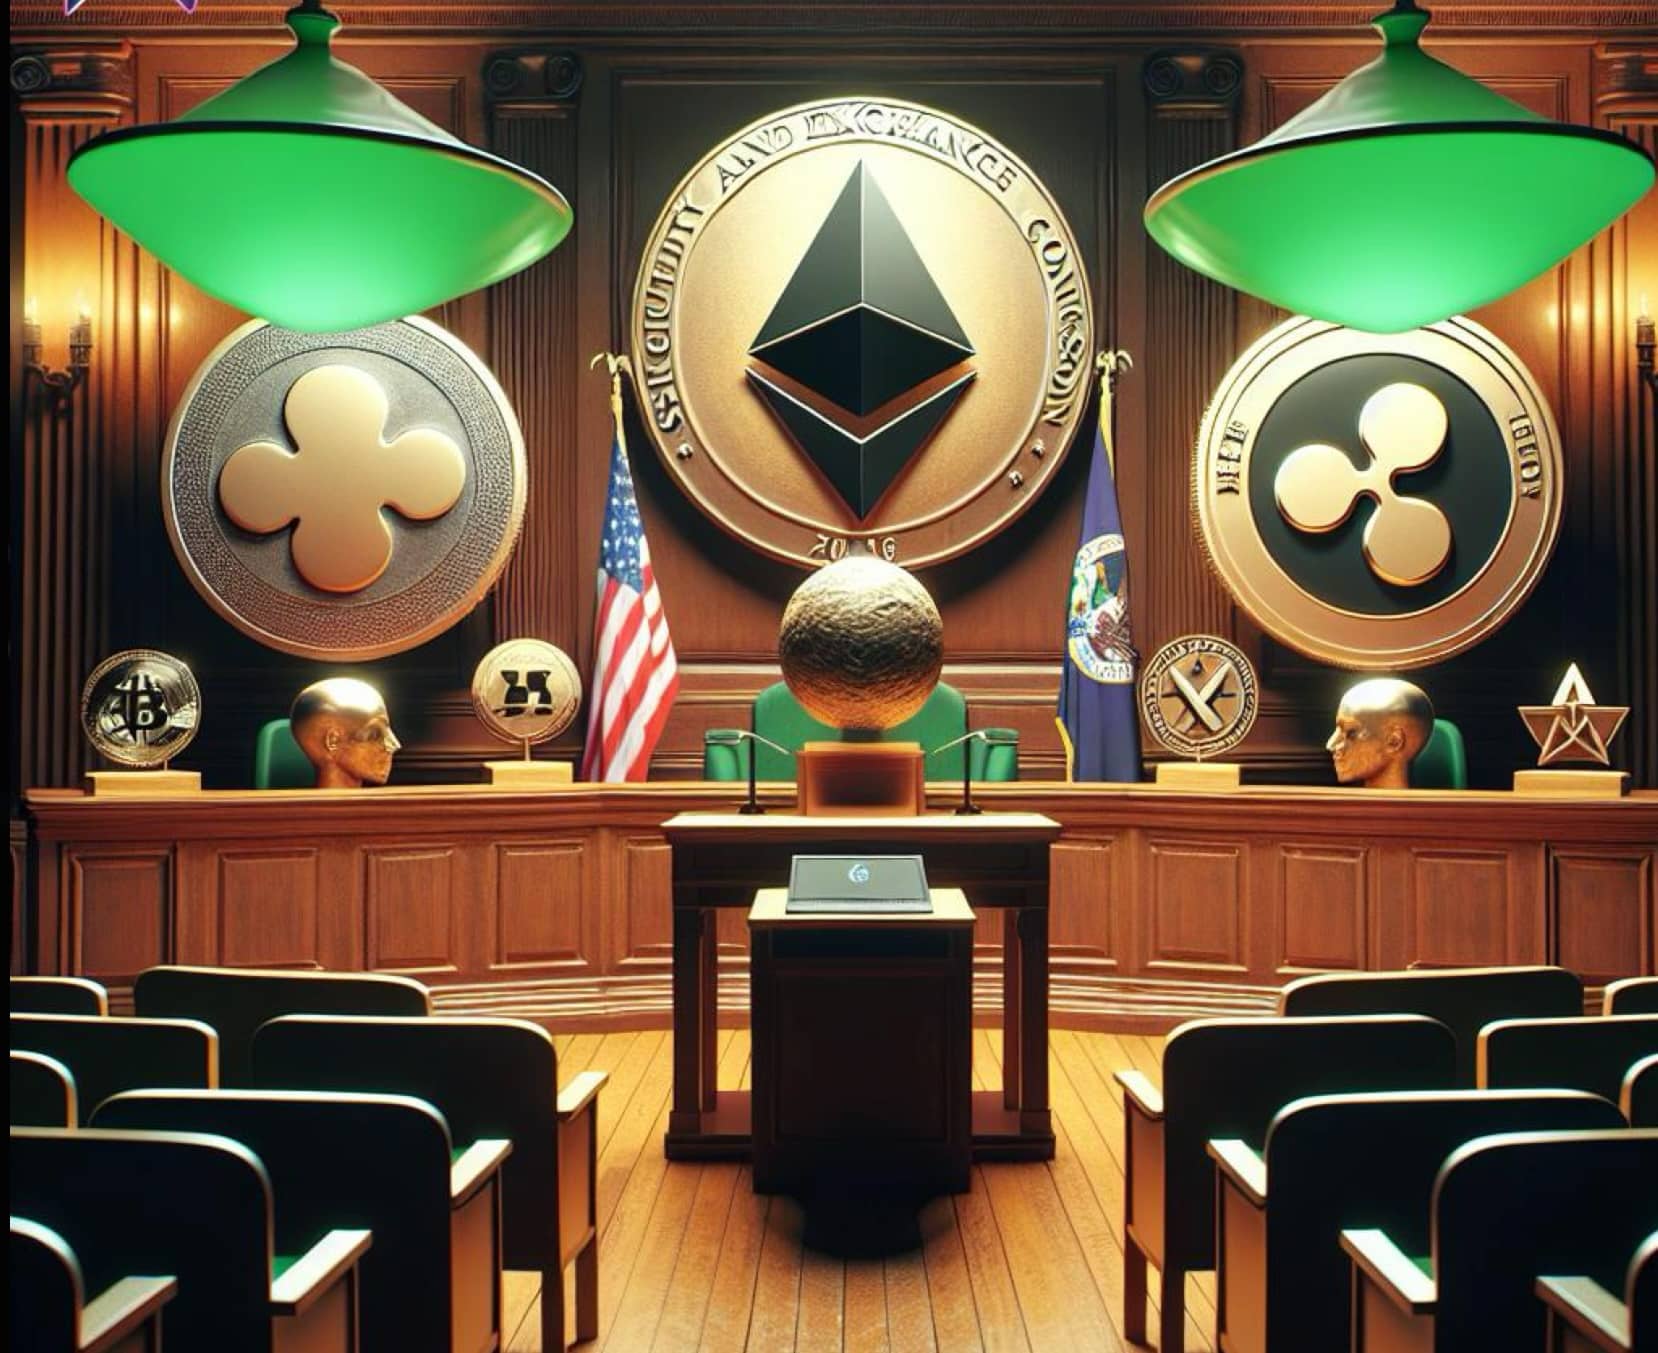 Although the Ripple community feel Ethereum have been given preferential treatment by the SEC, they will now be hoping for a similar outcome.